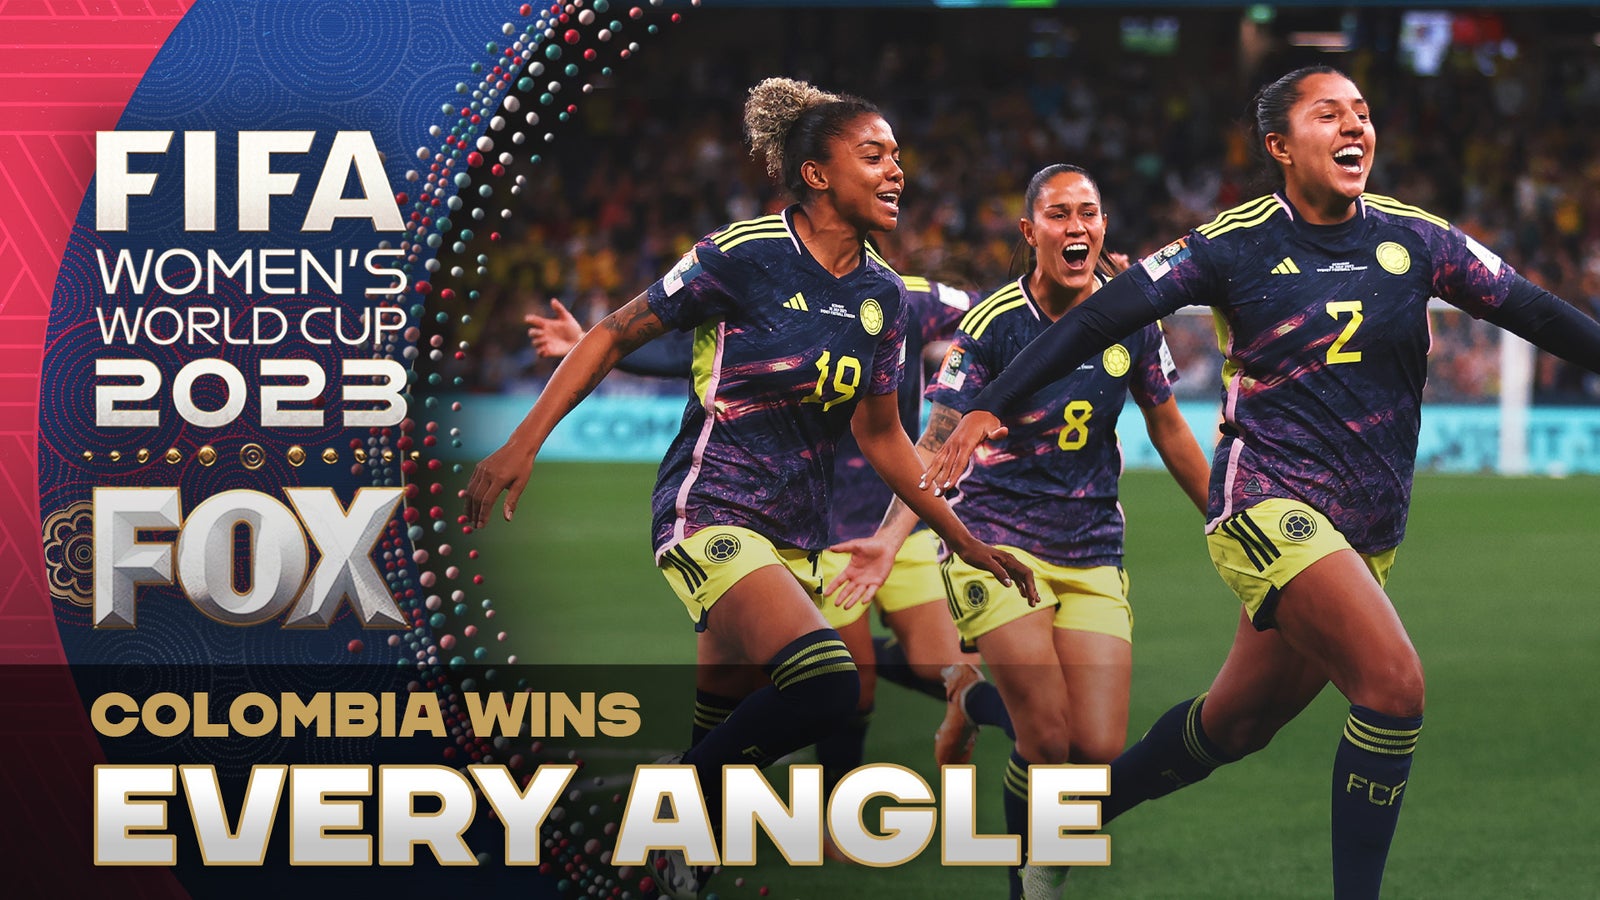 Linda Caicedo and Manuela Vanegas' goals lead Colombia to an EPIC upset vs. Germany 